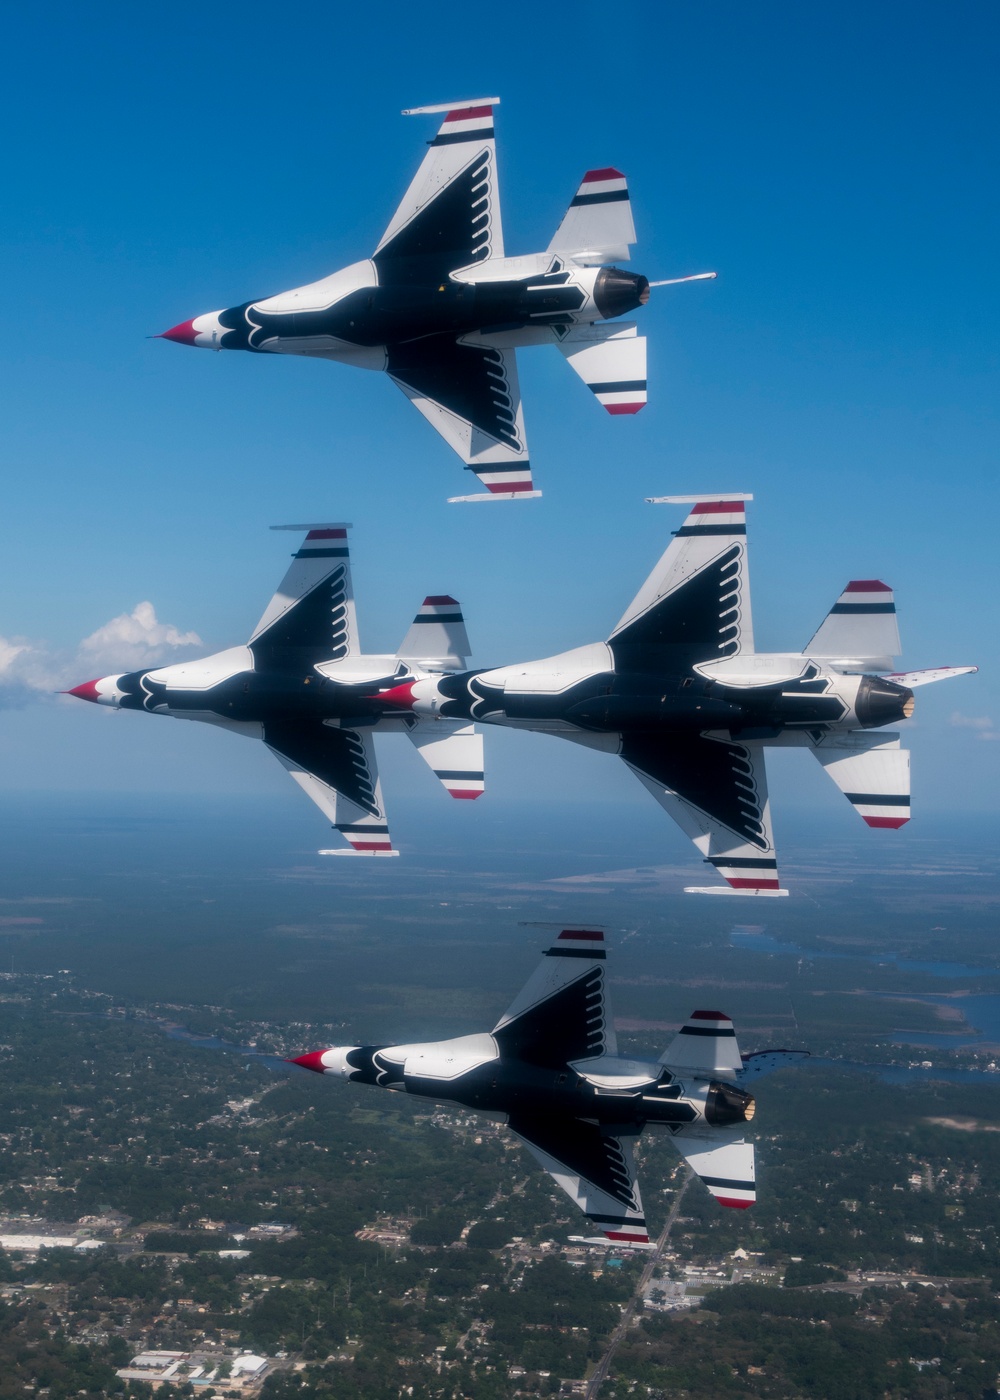 Thunderbirds Perform Over Tyndall AFB, Help Kick Off 70th Anniversary